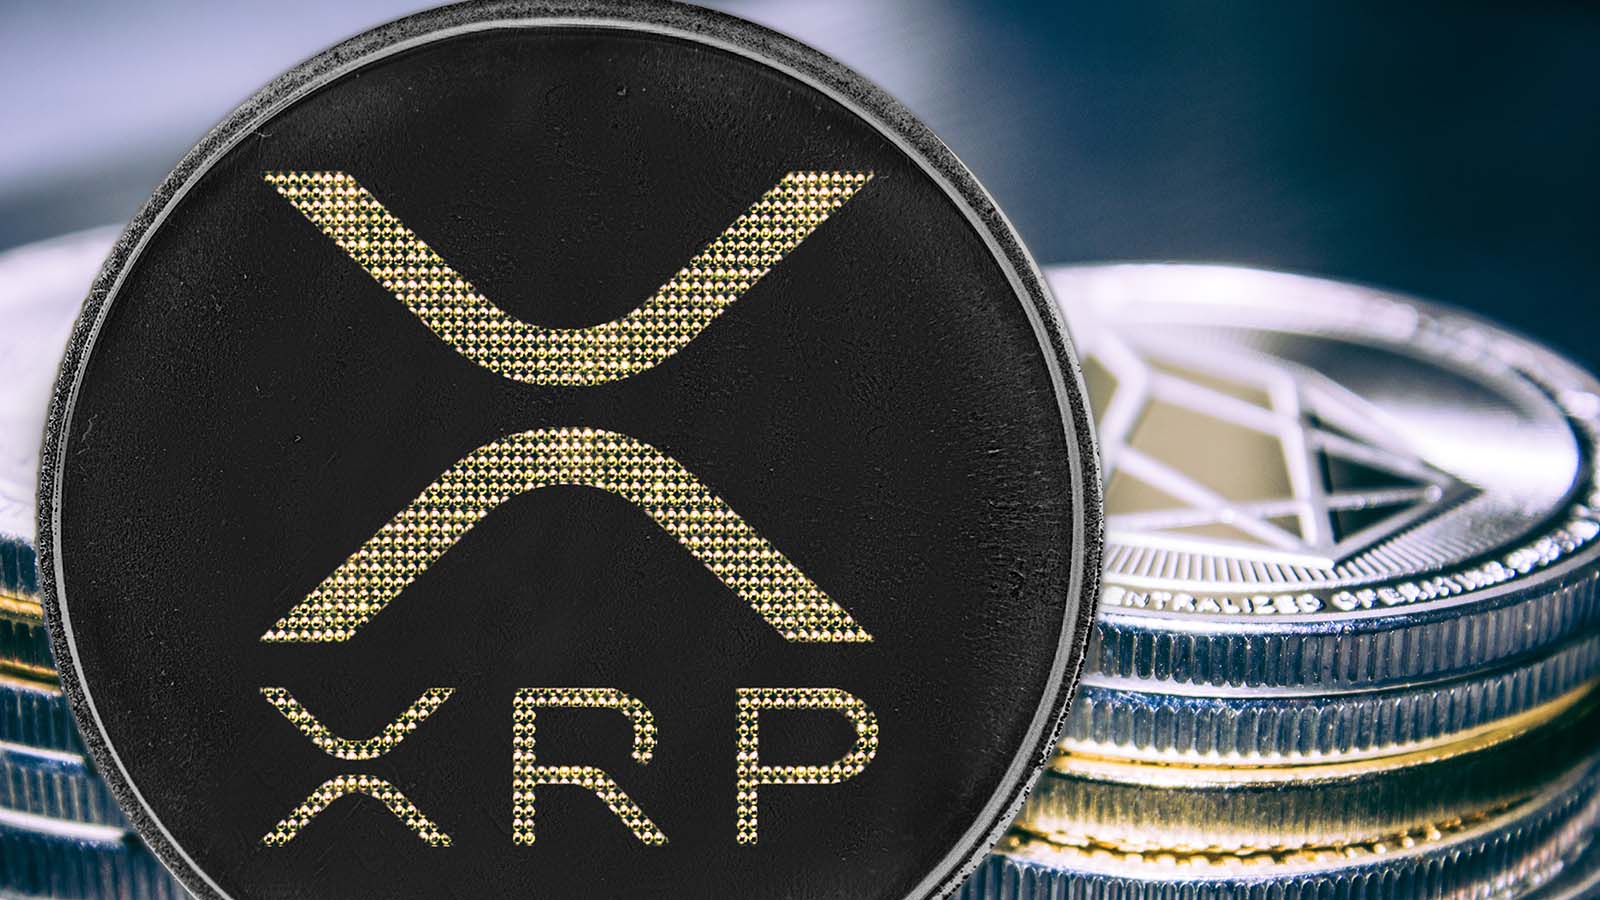 XRP Price Mania over “Airdrop” Could Drive XRP Up 300% ...